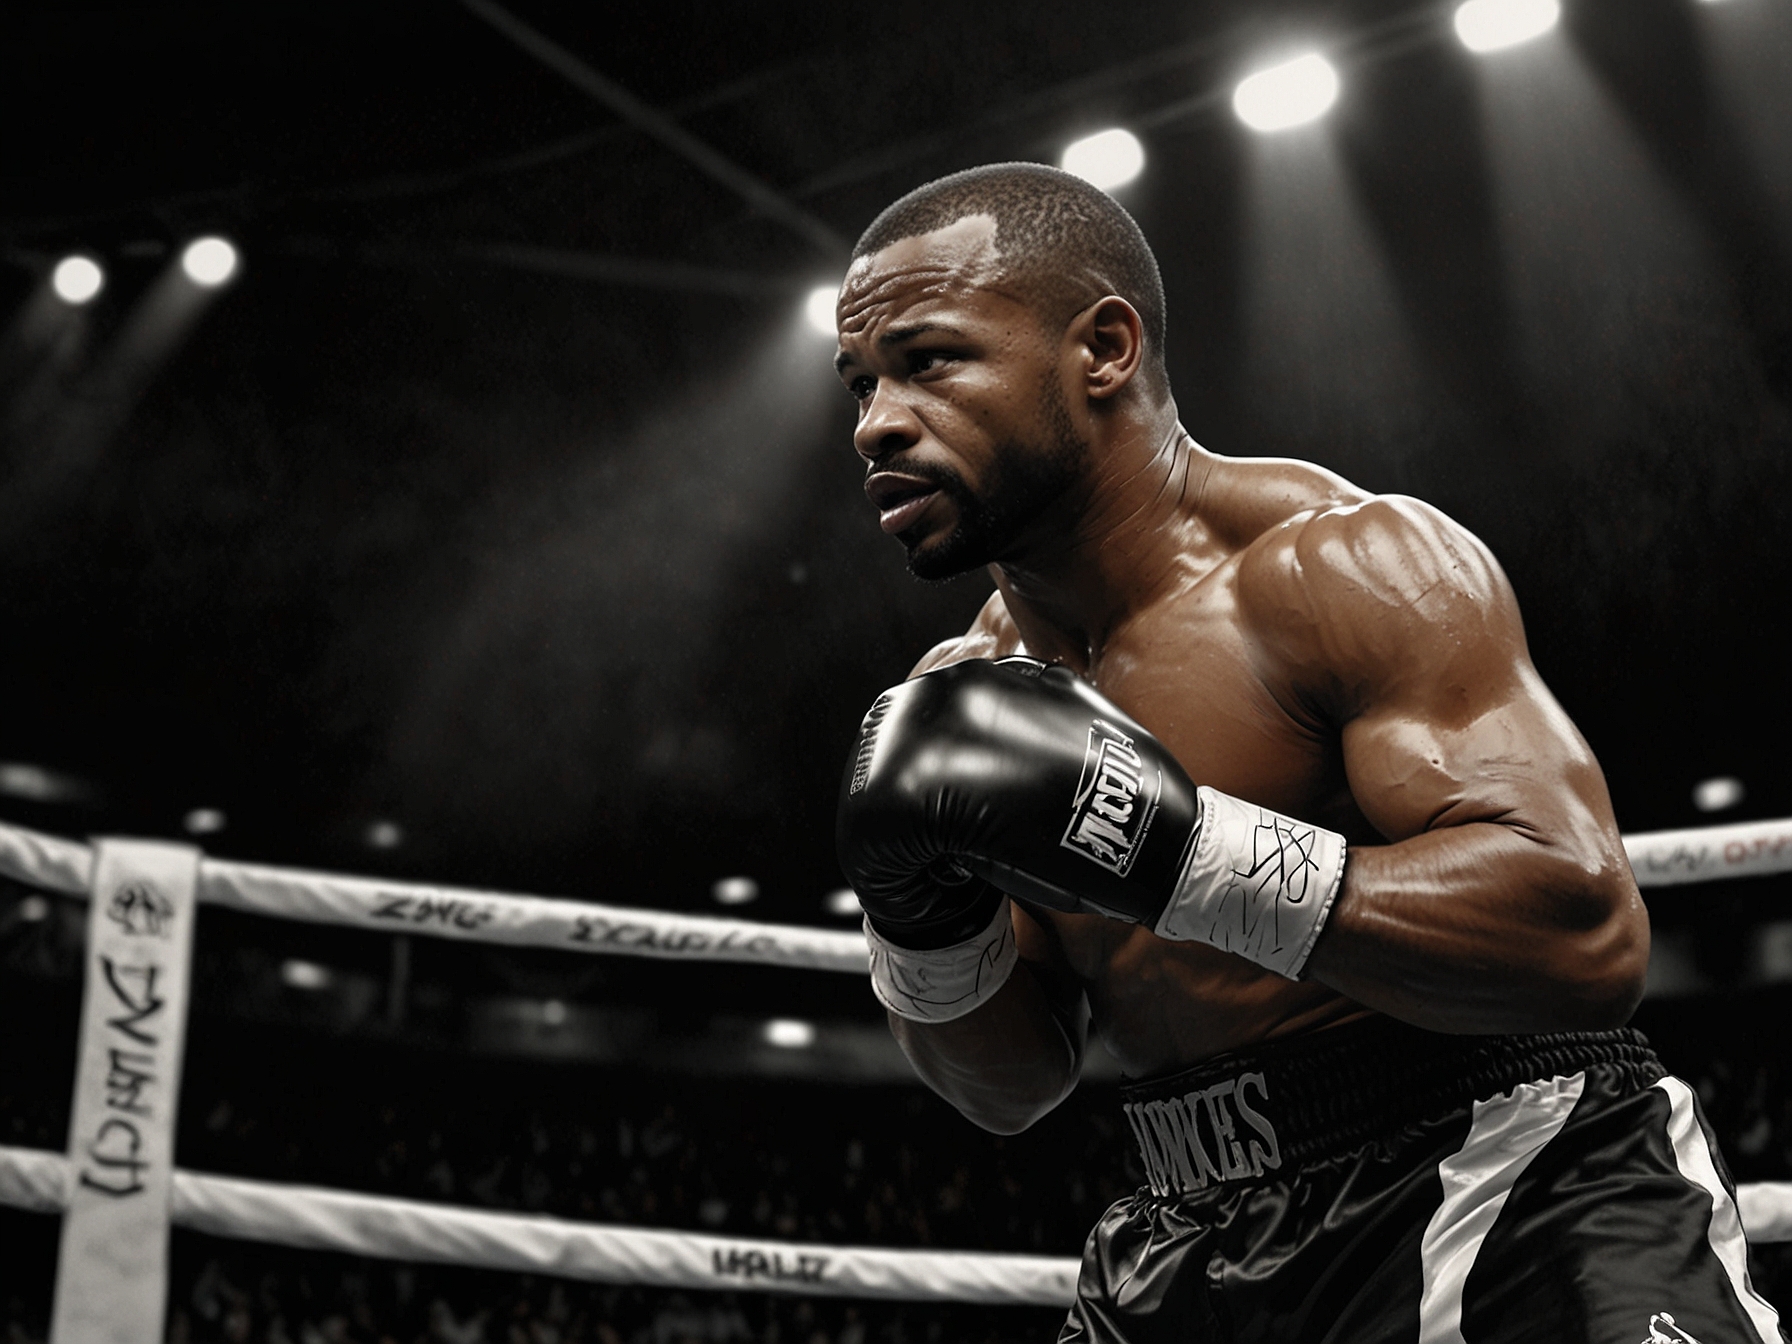 An illustration of Roy Jones Jr. in the boxing ring, showcasing his agility and strength, symbolizing his remarkable career that spanned over three decades and multiple weight classes.